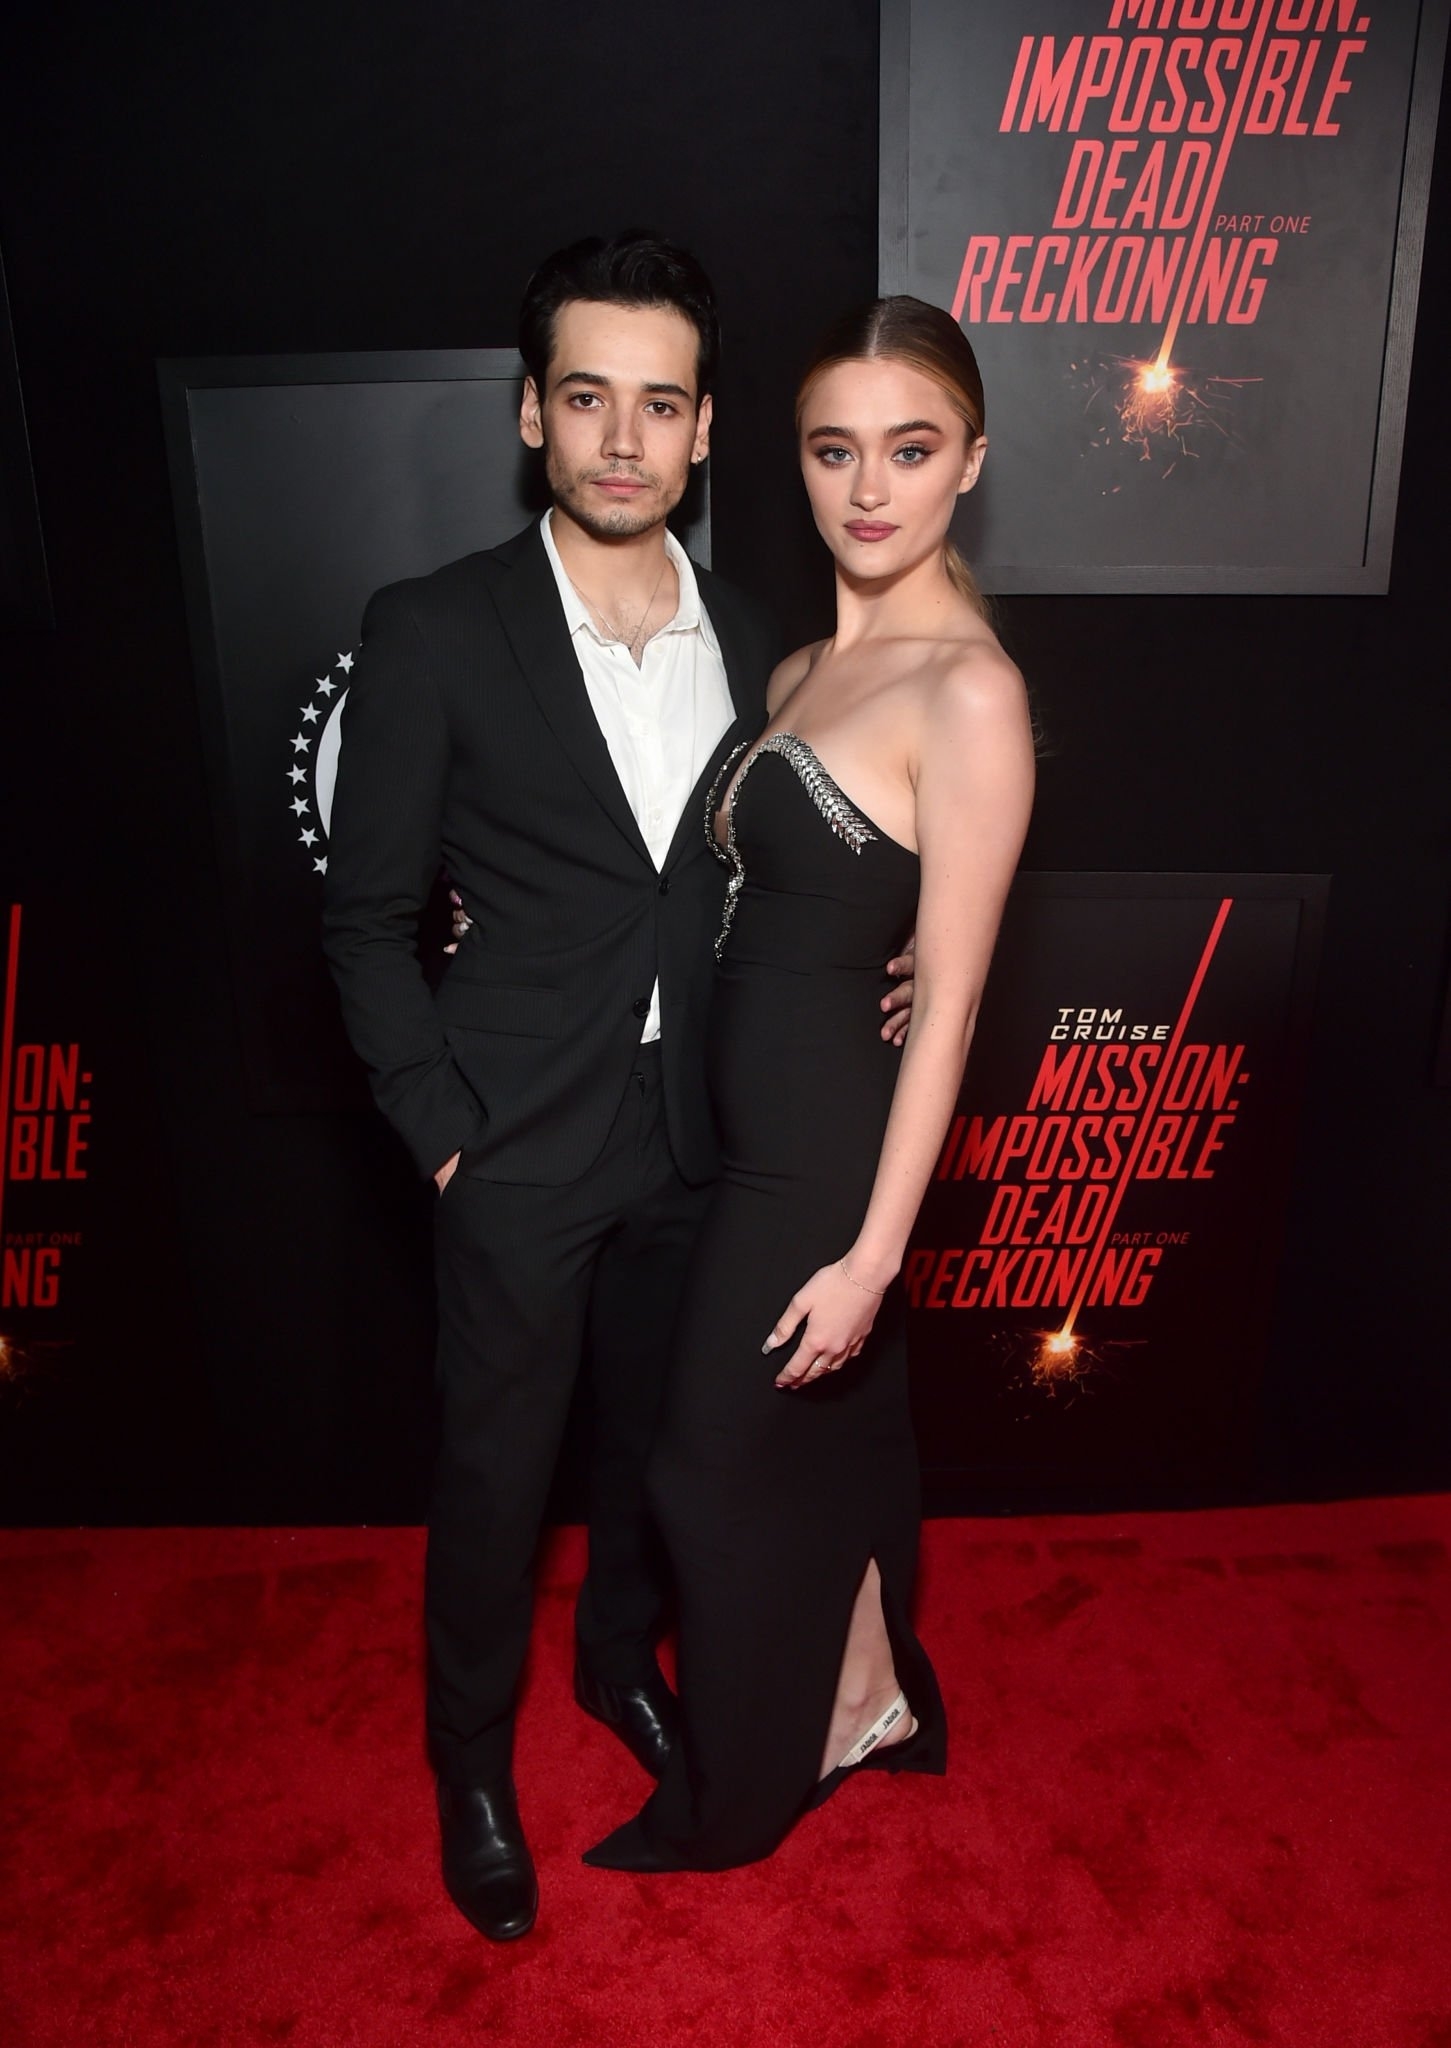 (L-R) Alejandro Ahara and Lizzy Greene attend a Young Hollywood Screening of "Mission: Impossible - Dead Reckoning Part One" presented by Paramount Pictures and Skydance at the Paramount Theatre on June 26, 2023, in Los Angeles, California.